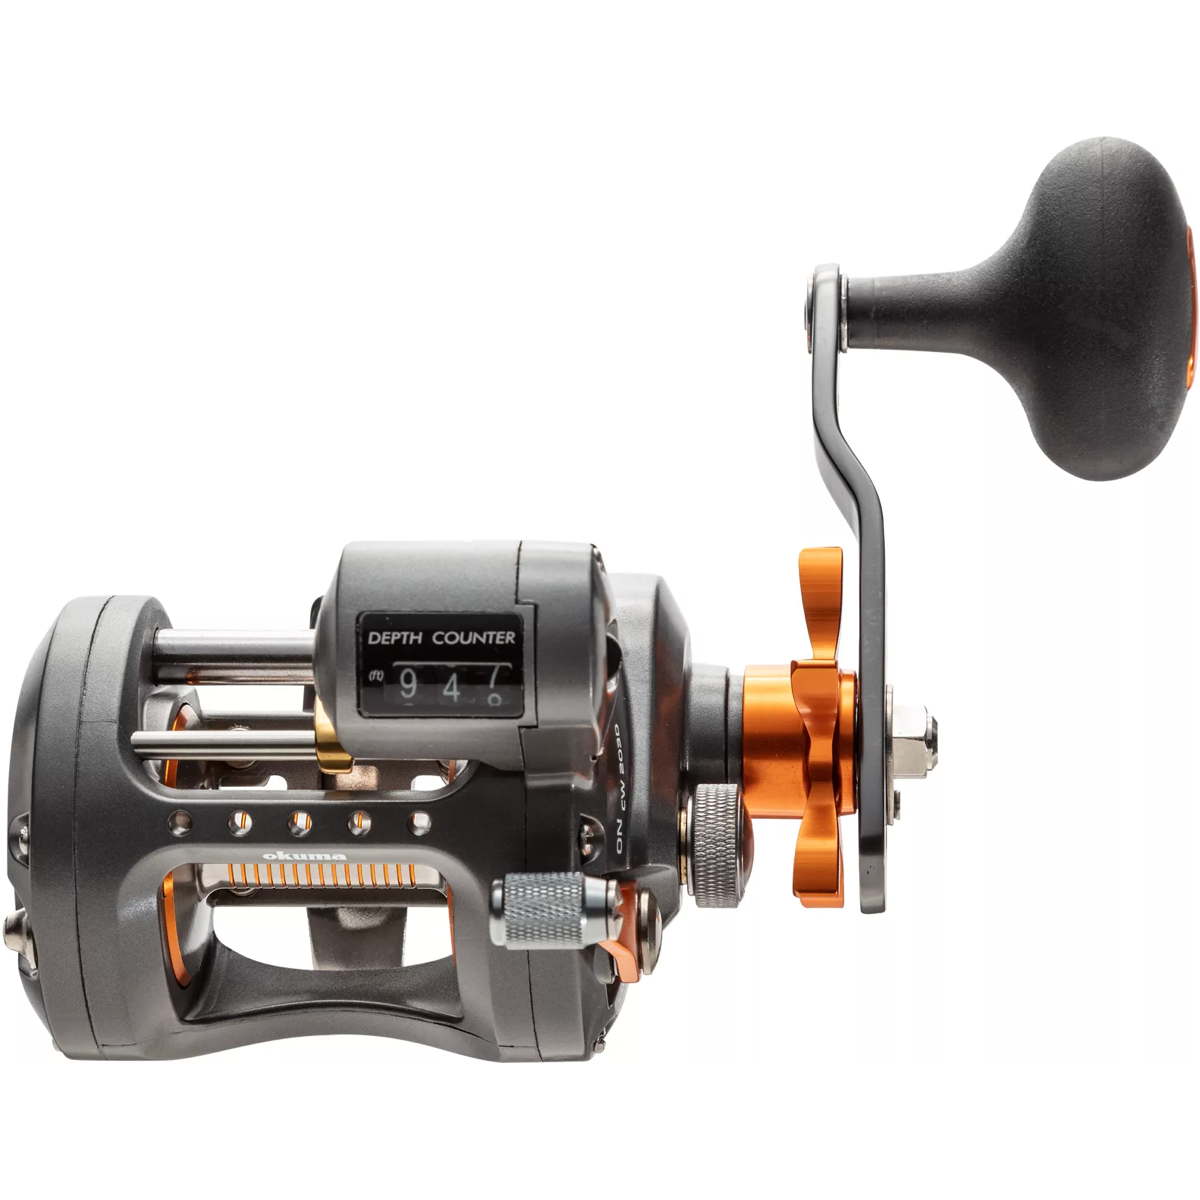 Photo of Okuma Cold Water Line Counter Reel for sale at United Tackle Shops.